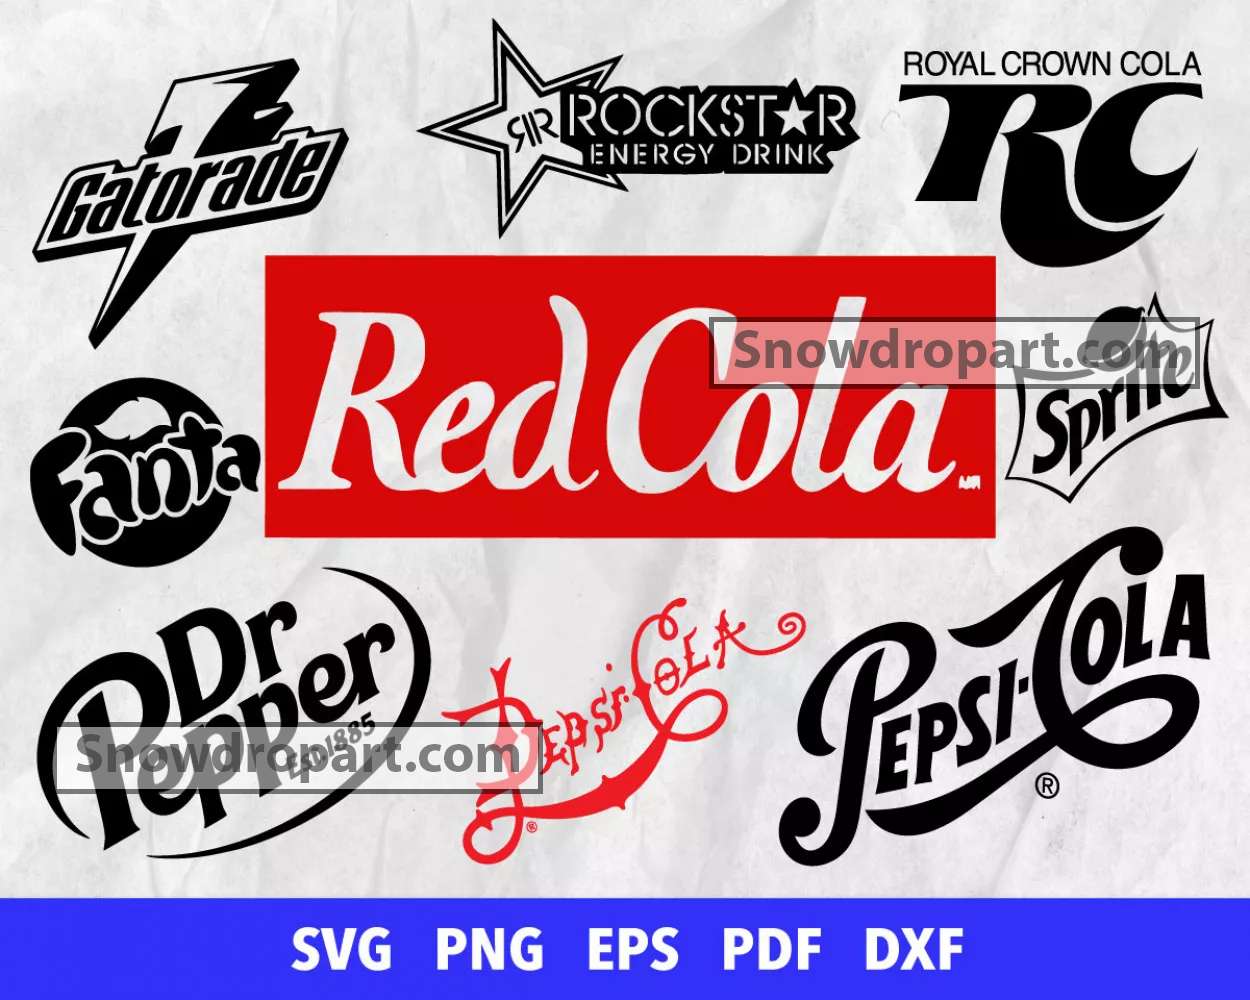 Coca Cola Logo, symbol, meaning, history, PNG, brand